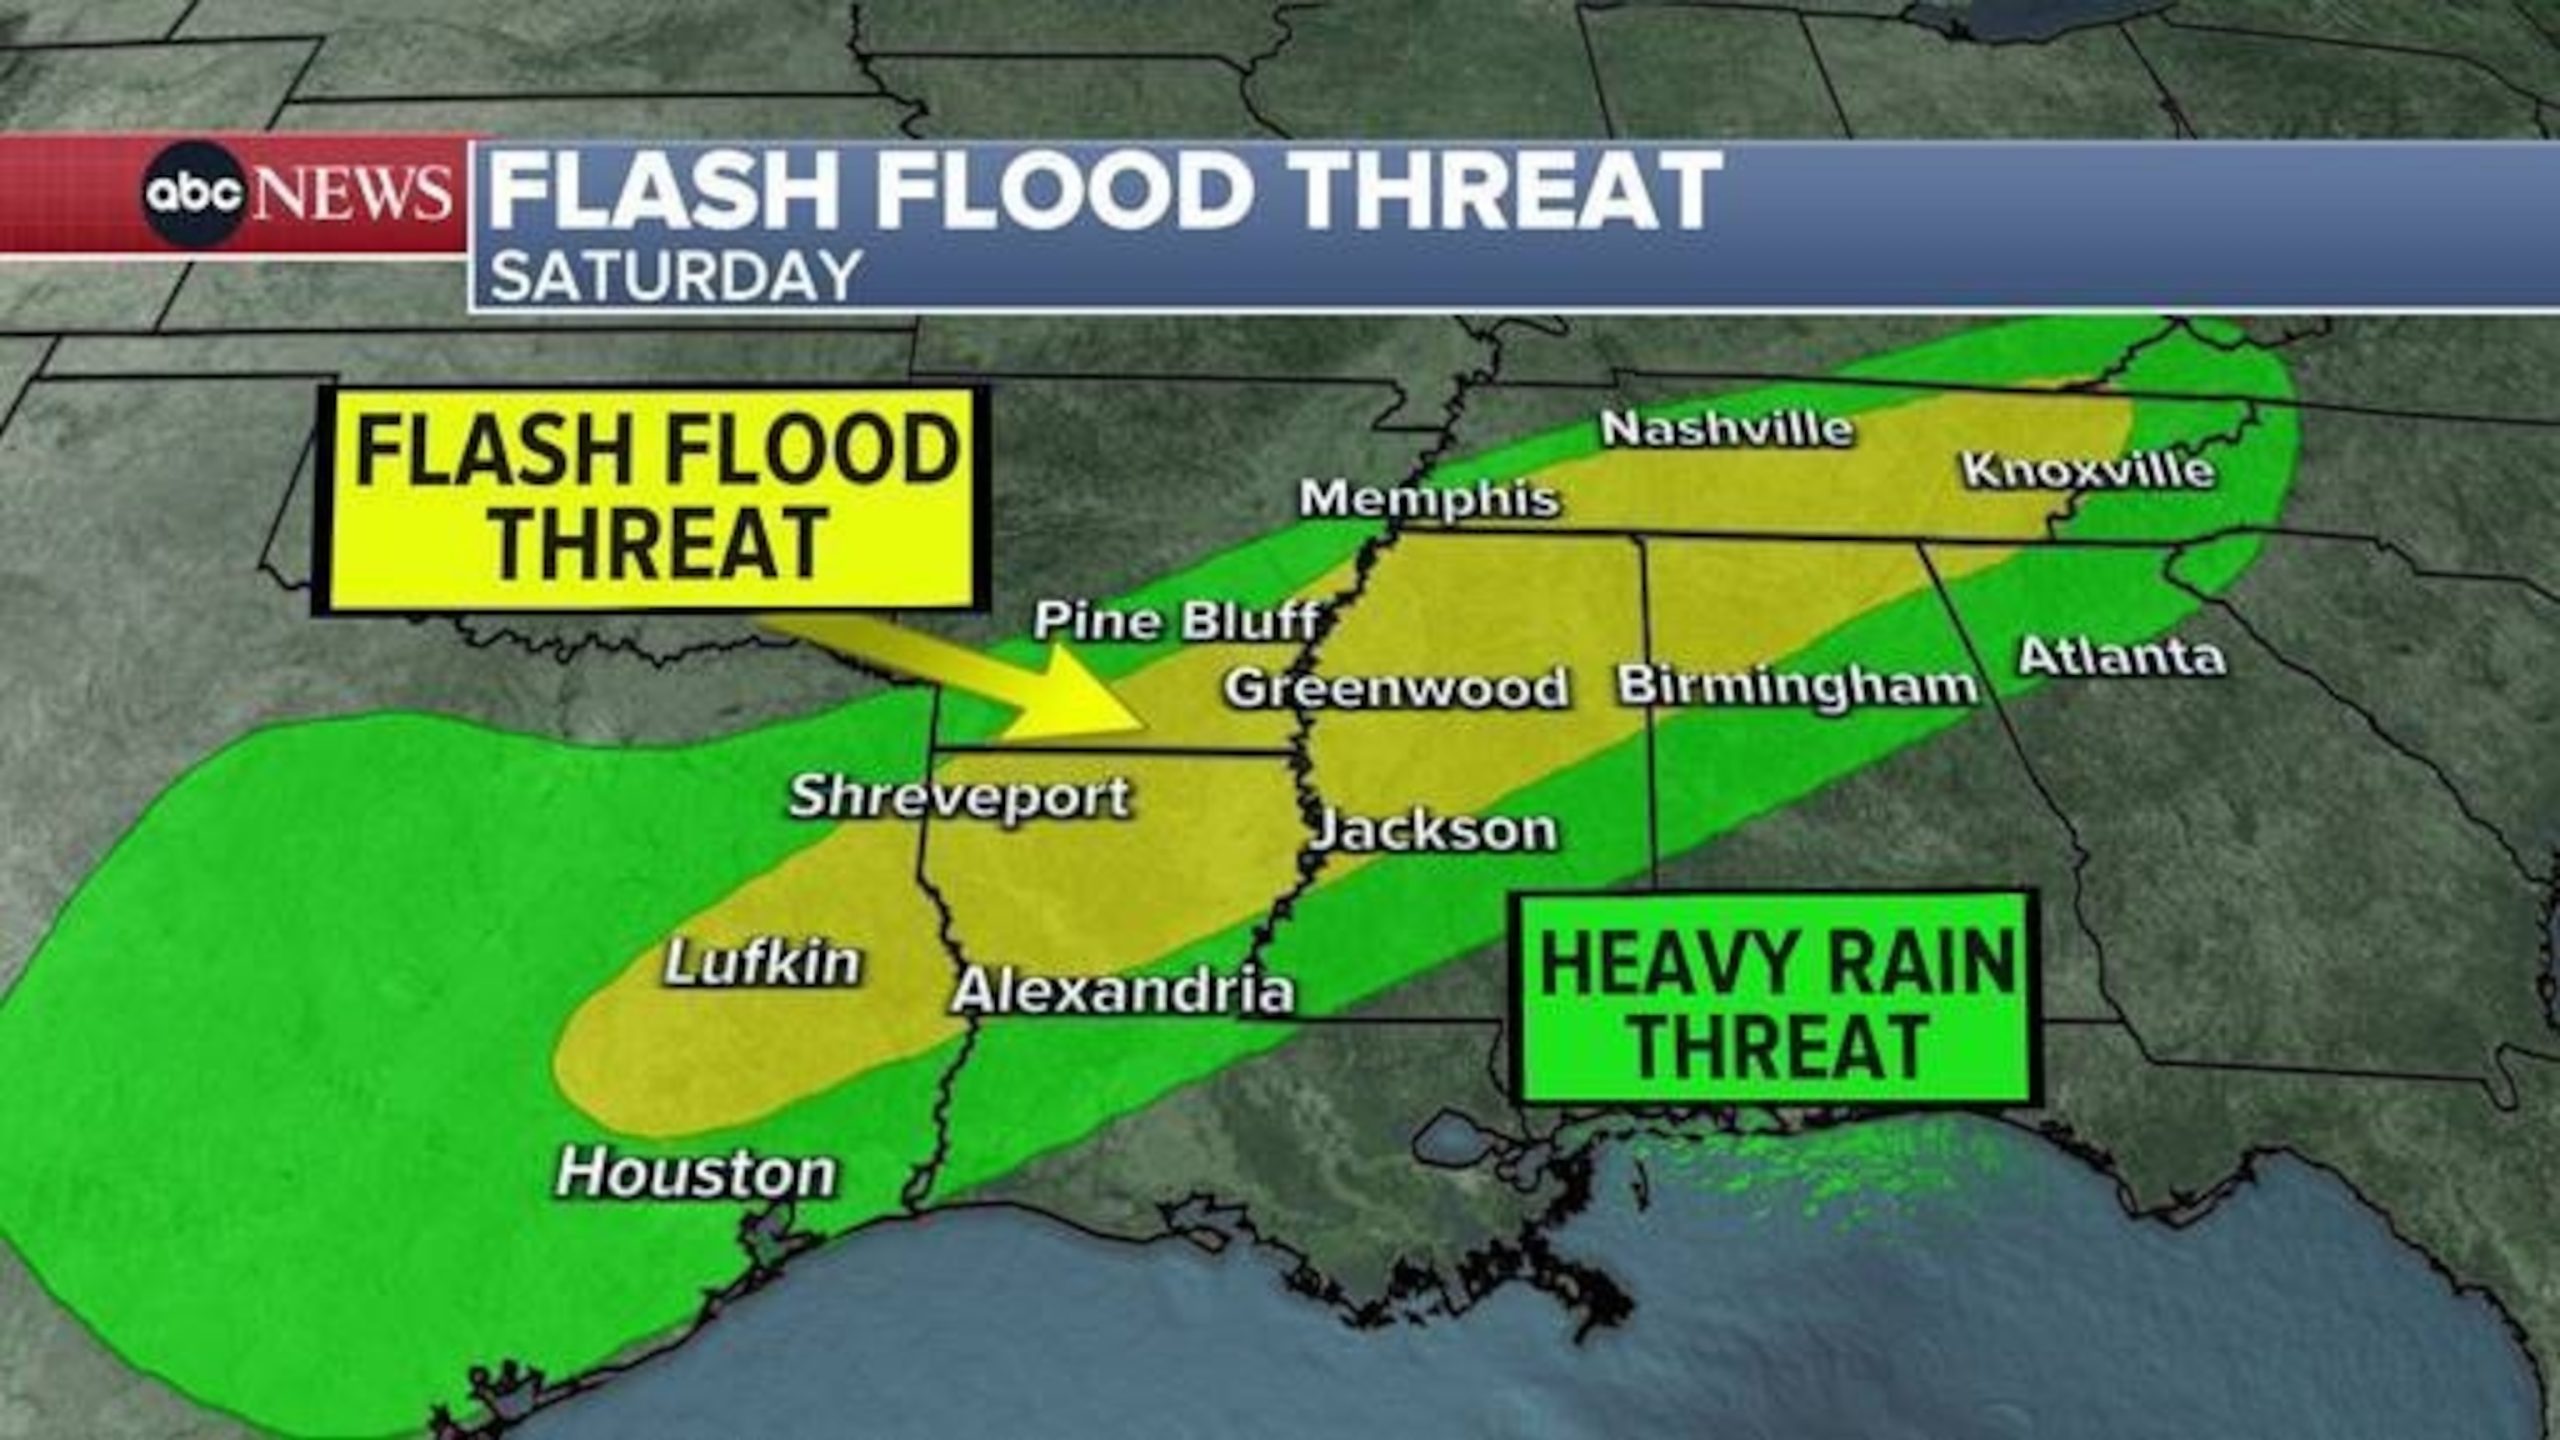 Potential for Heavy Rain and Flooding in the South this Weekend